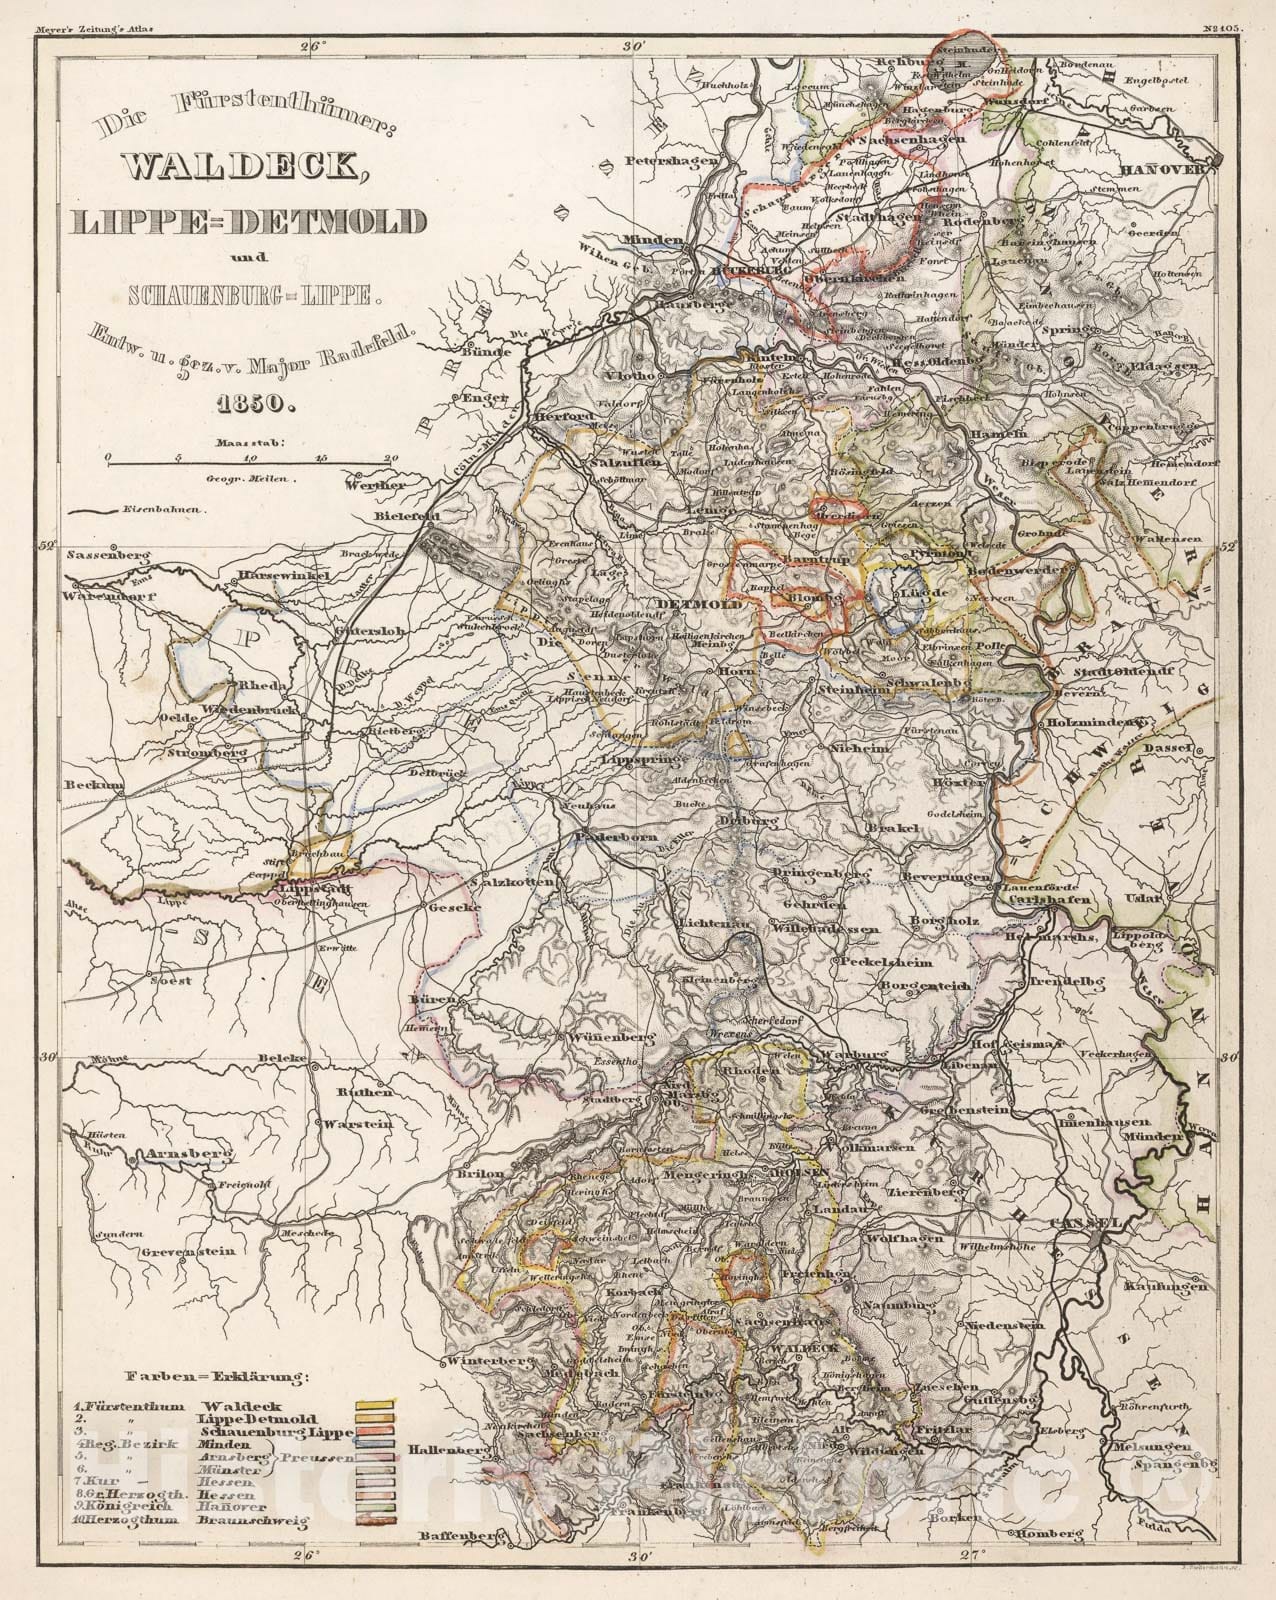 Historic Map : Meyer Map of The Principalities of Waldeck, LippeDetmold and SchaumburgLippe, Germany, 1850, Vintage Wall Art